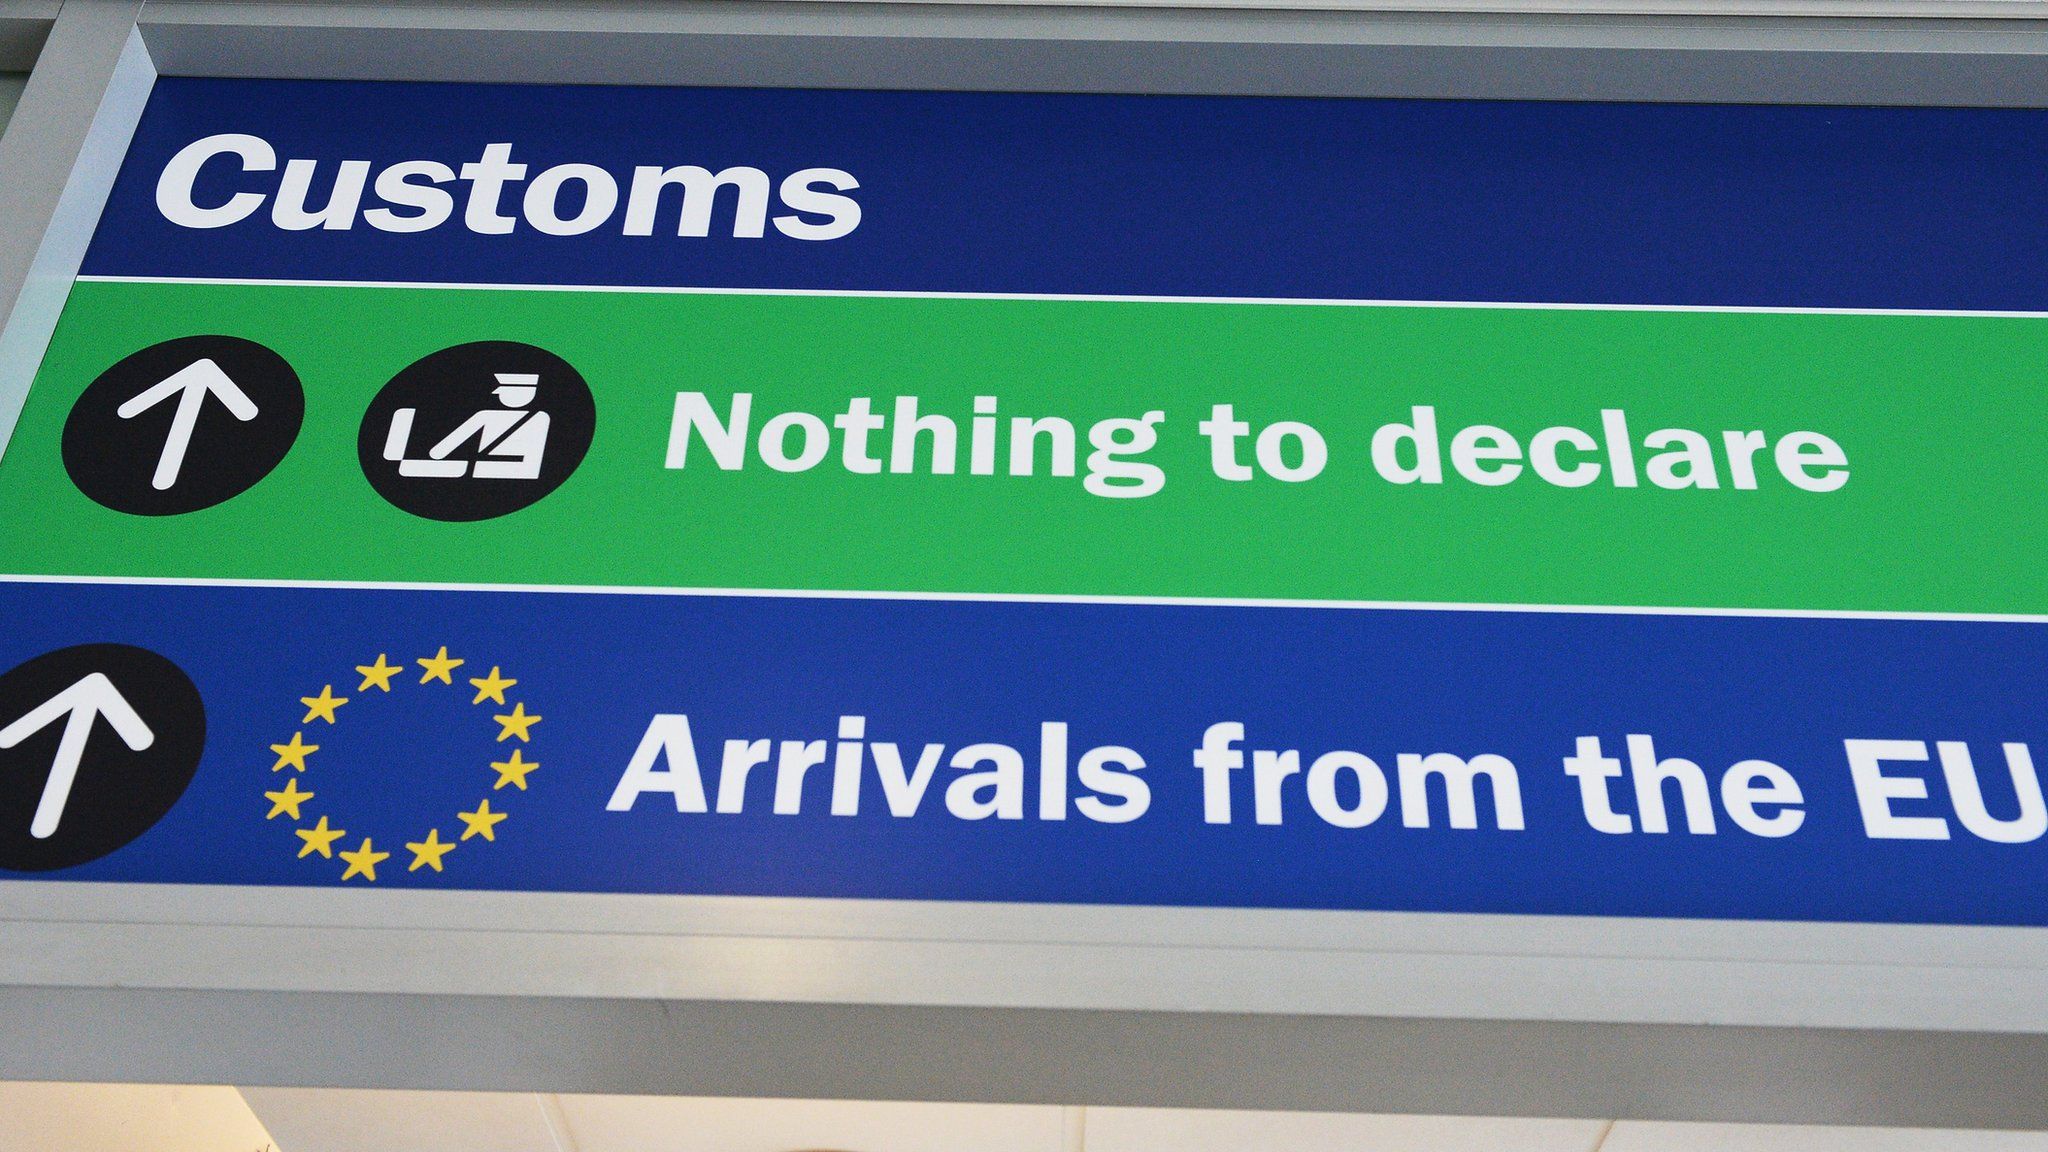 Sign for customs at airport